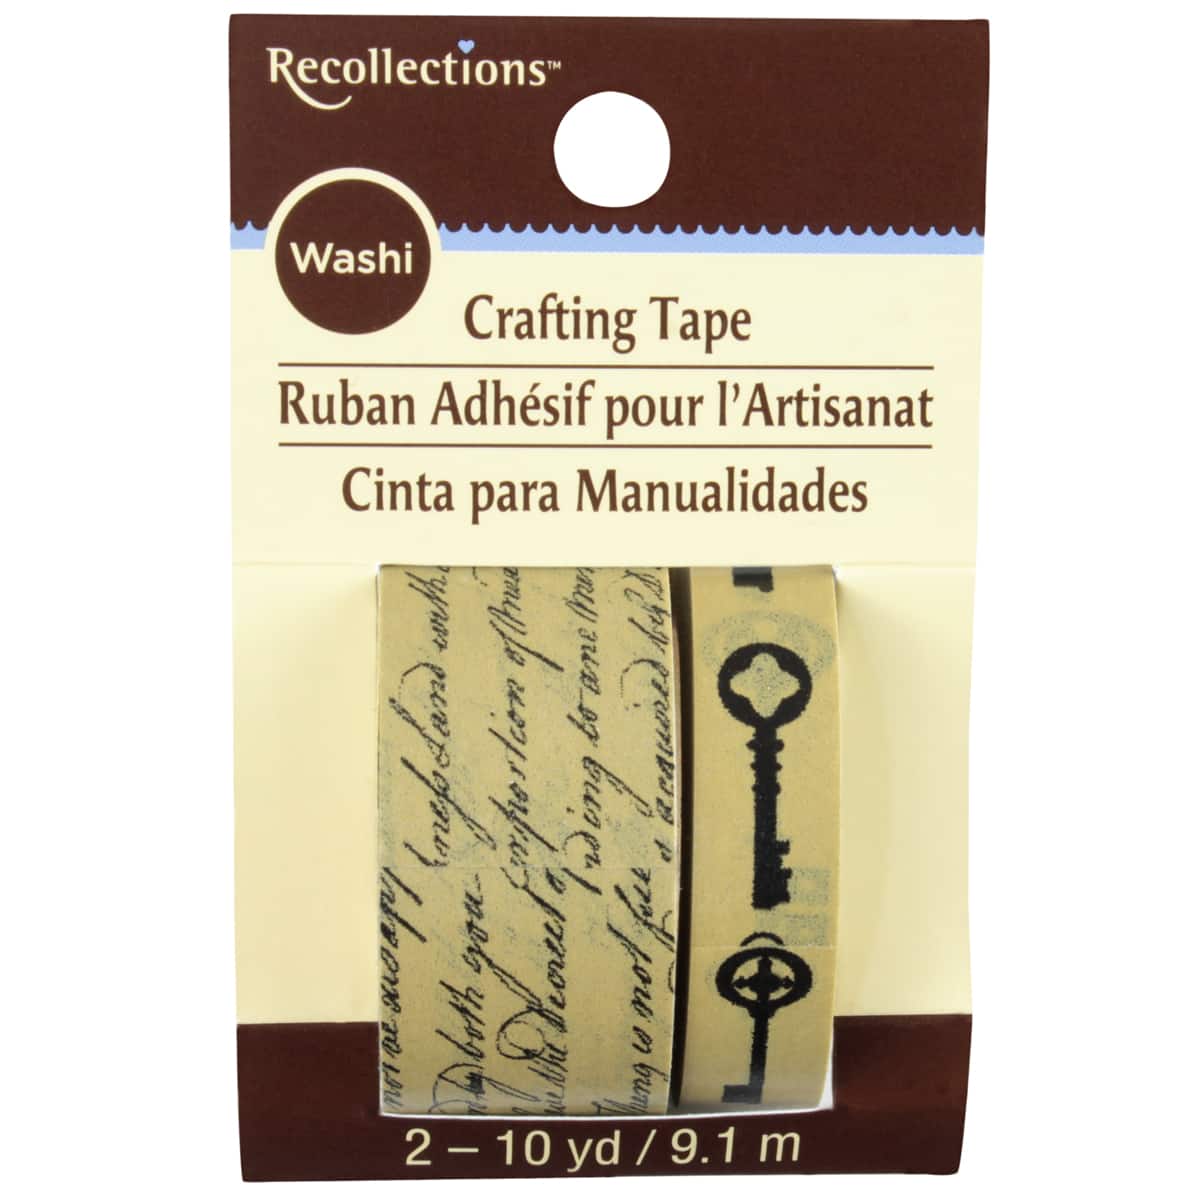 6 Packs: 14 ct. (84 total) Big Bloom Crafting Tape Set by Recollections™